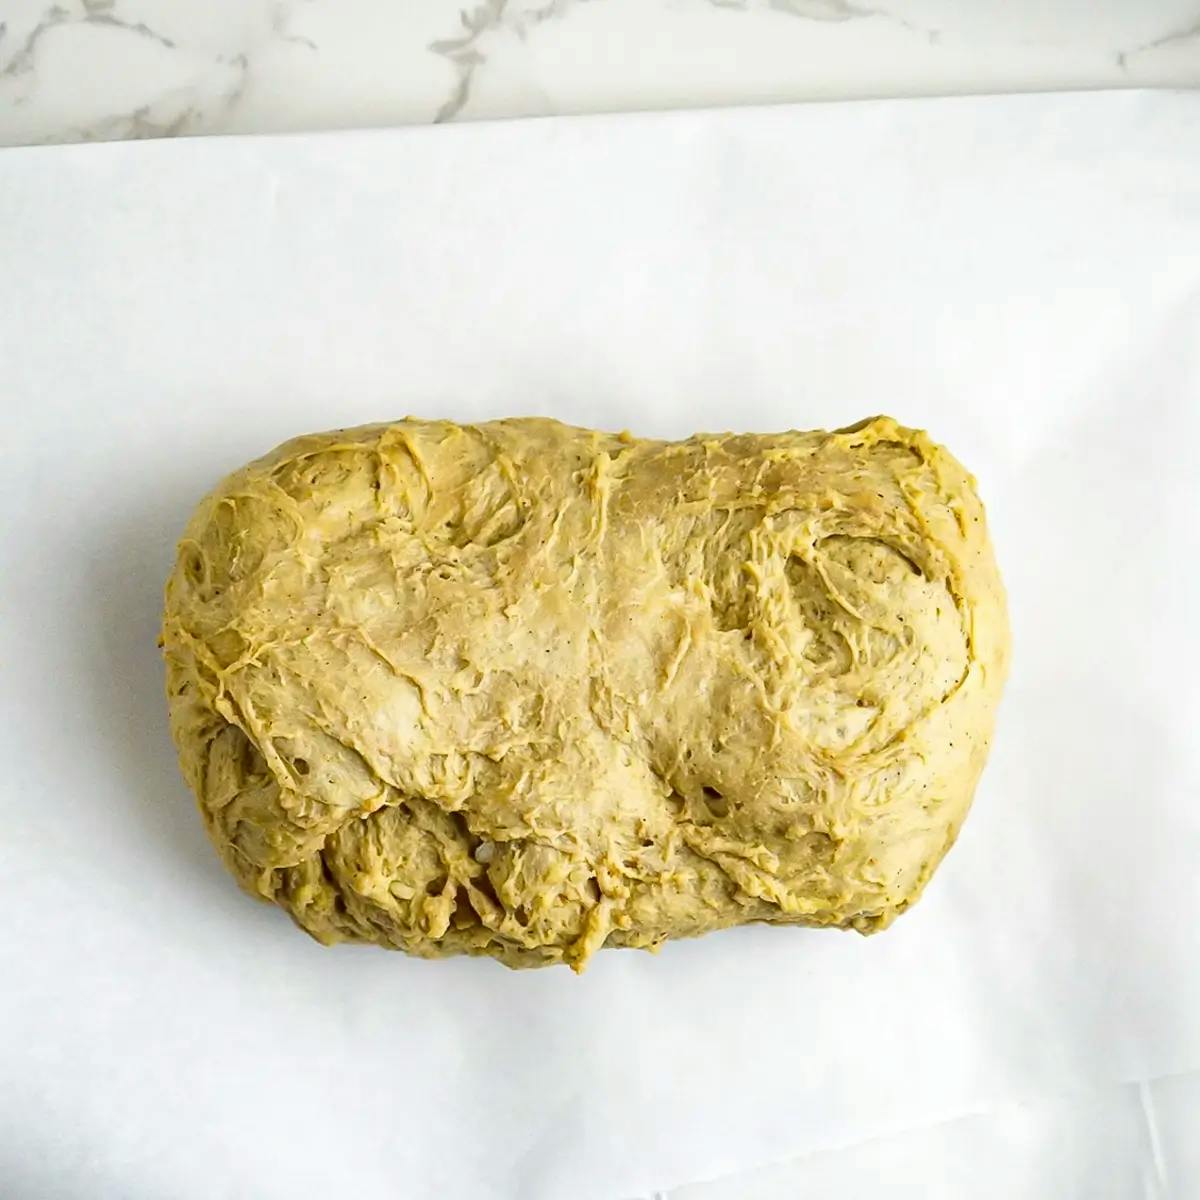 Letting the seitan dough rest for 10 minutes.